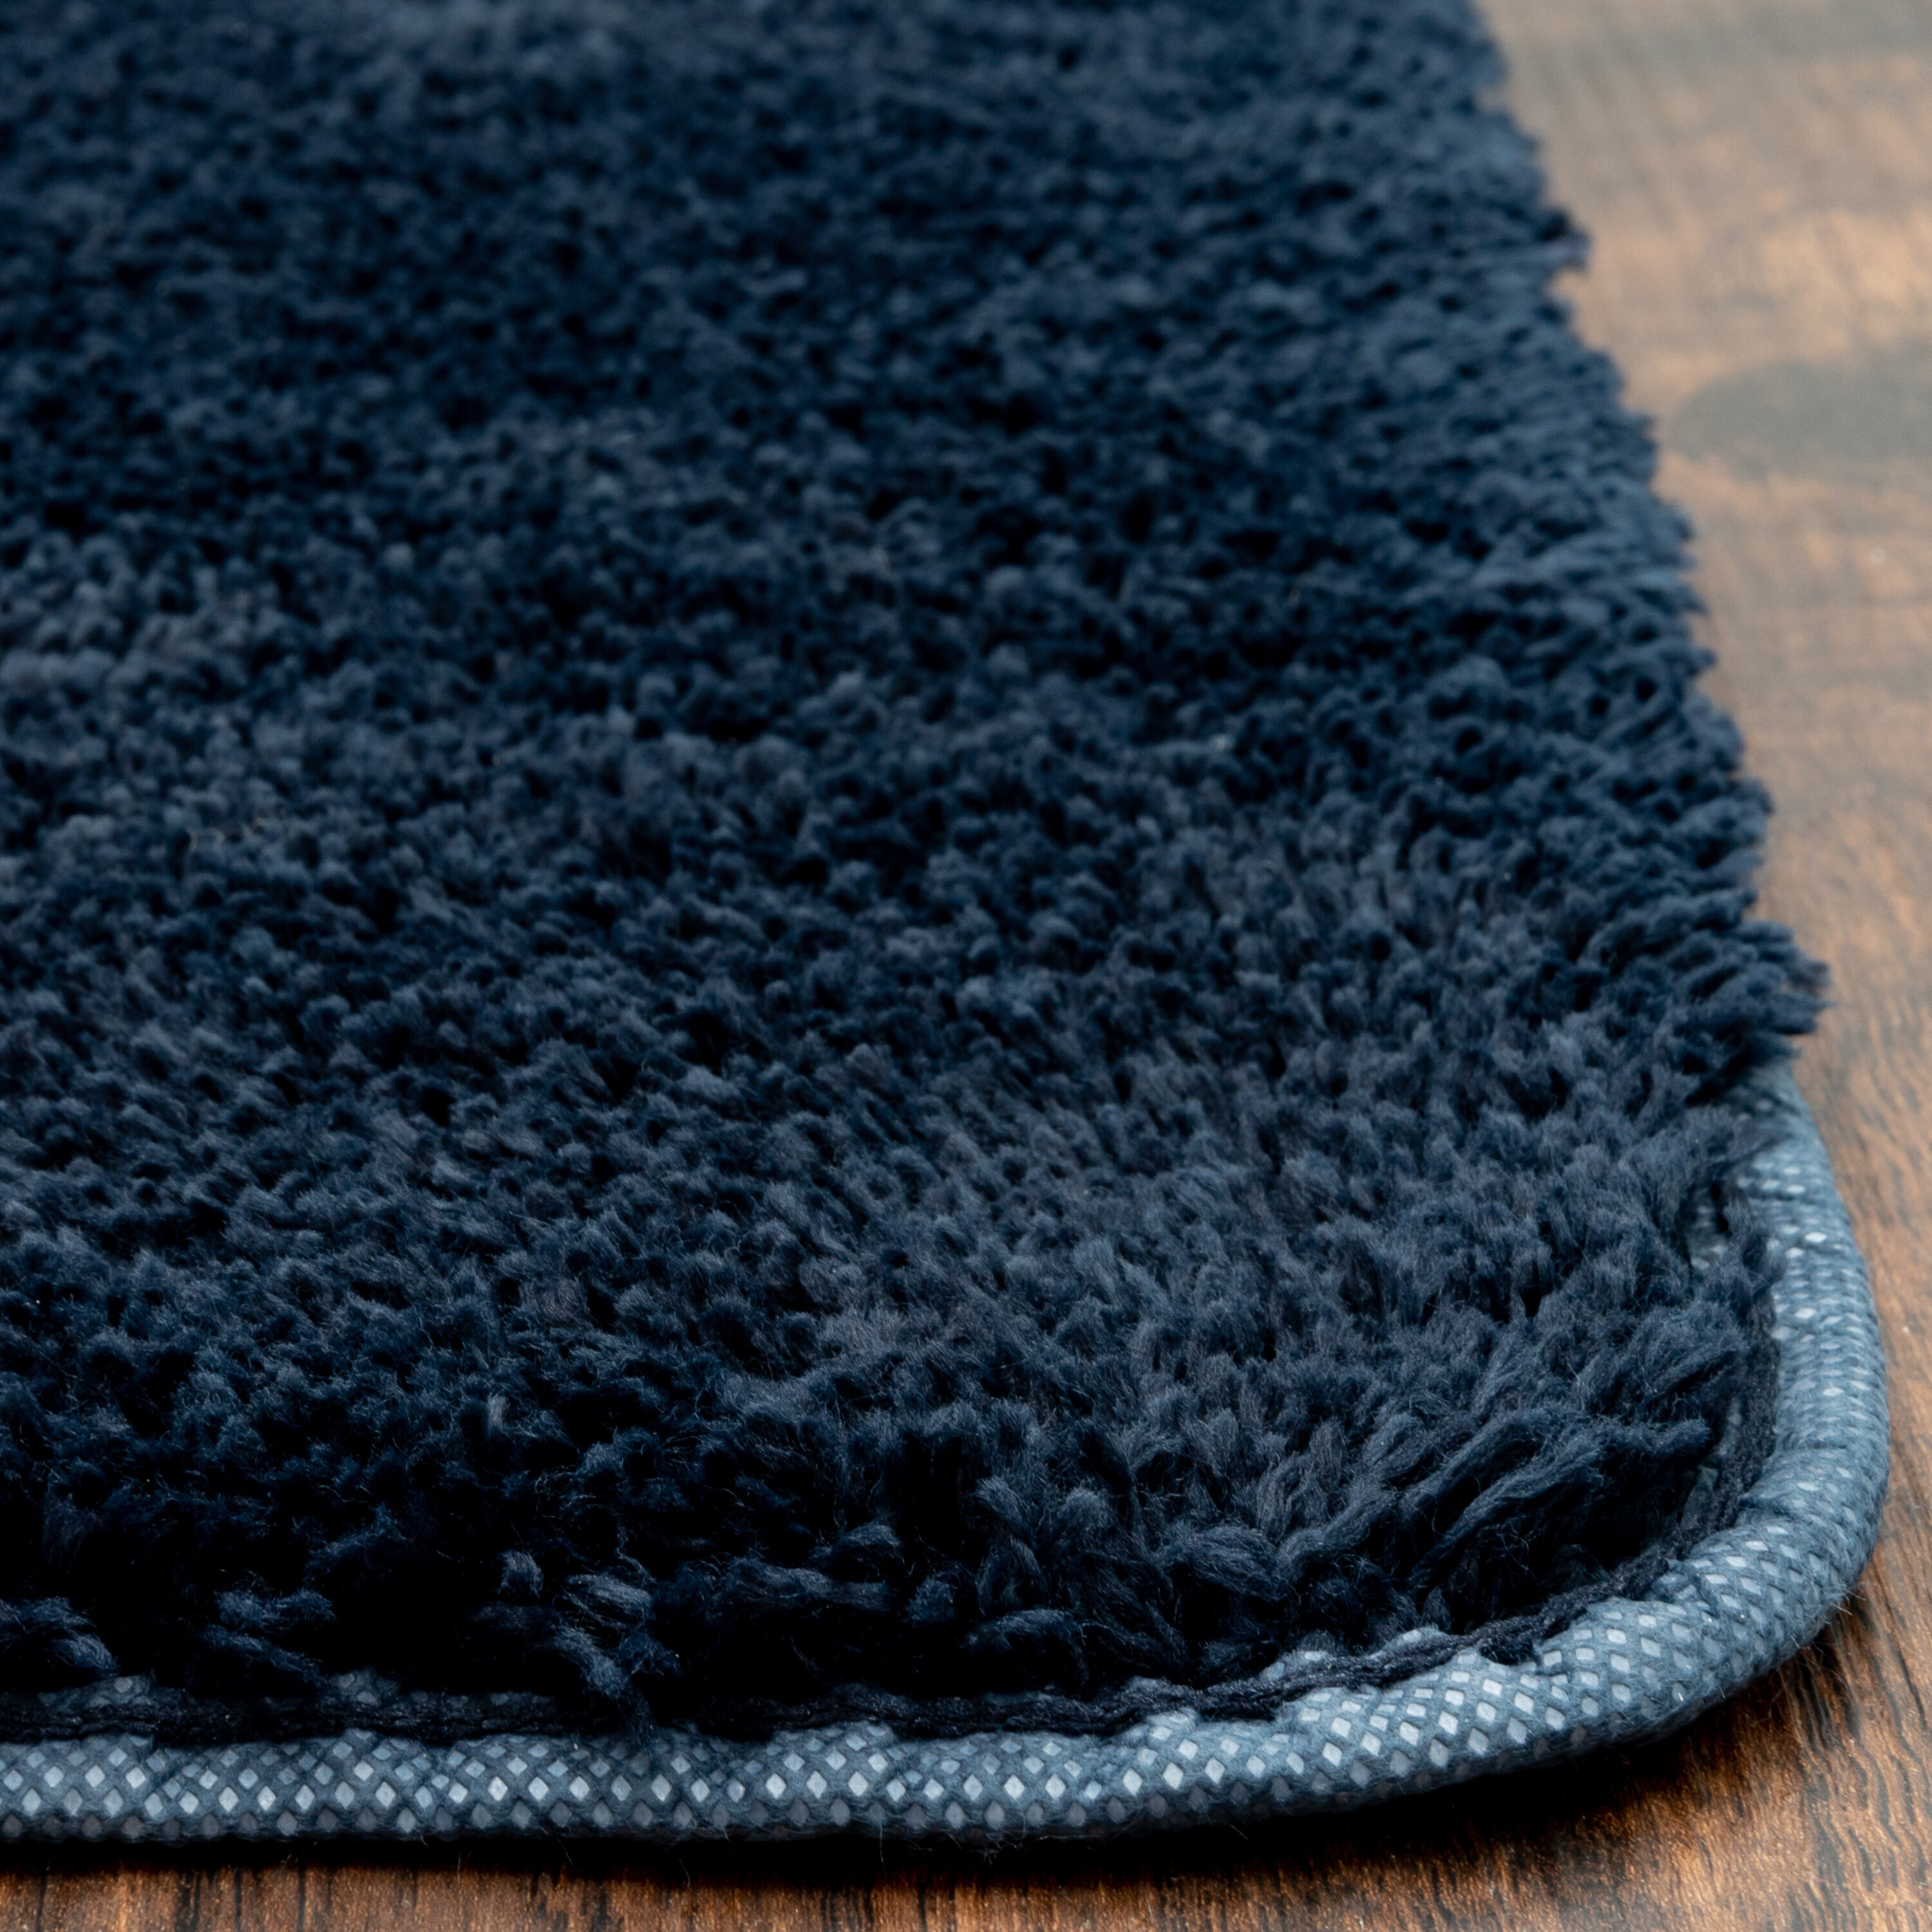 allen + roth 24-in x 40-in Dark Gray Polyester Bath Mat in the Bathroom Rugs  & Mats department at